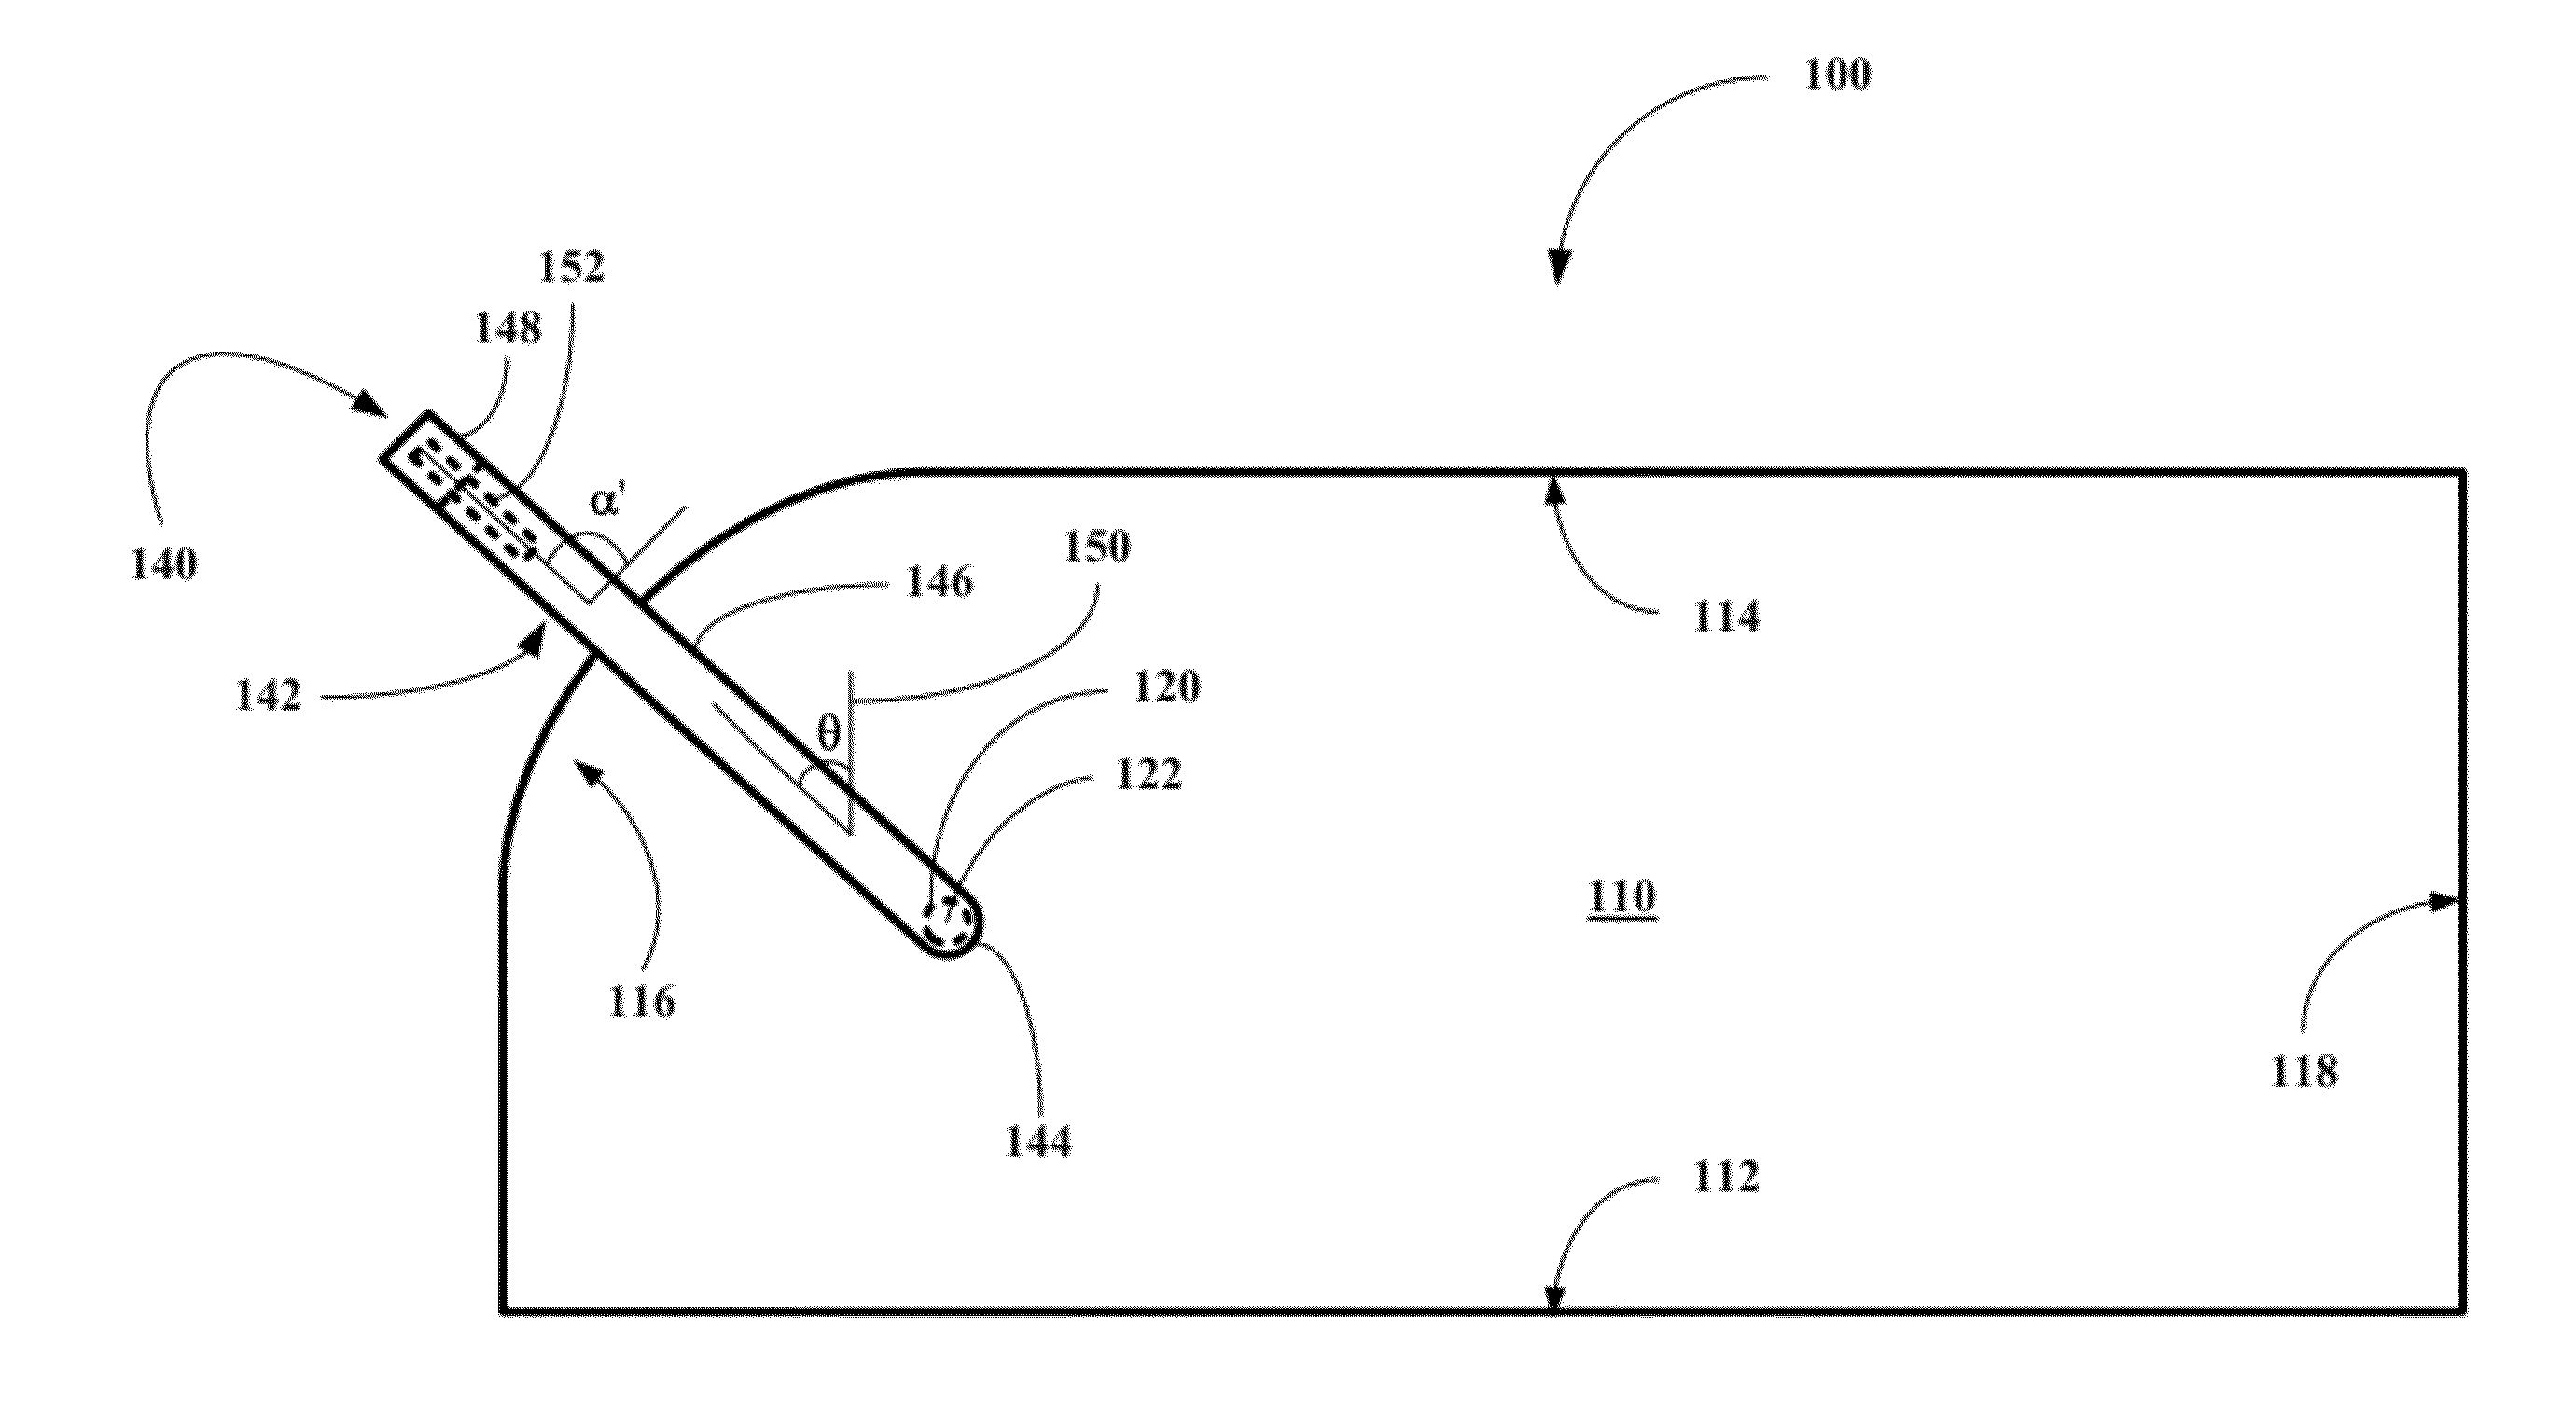 Intrathecal needle guide apparatus